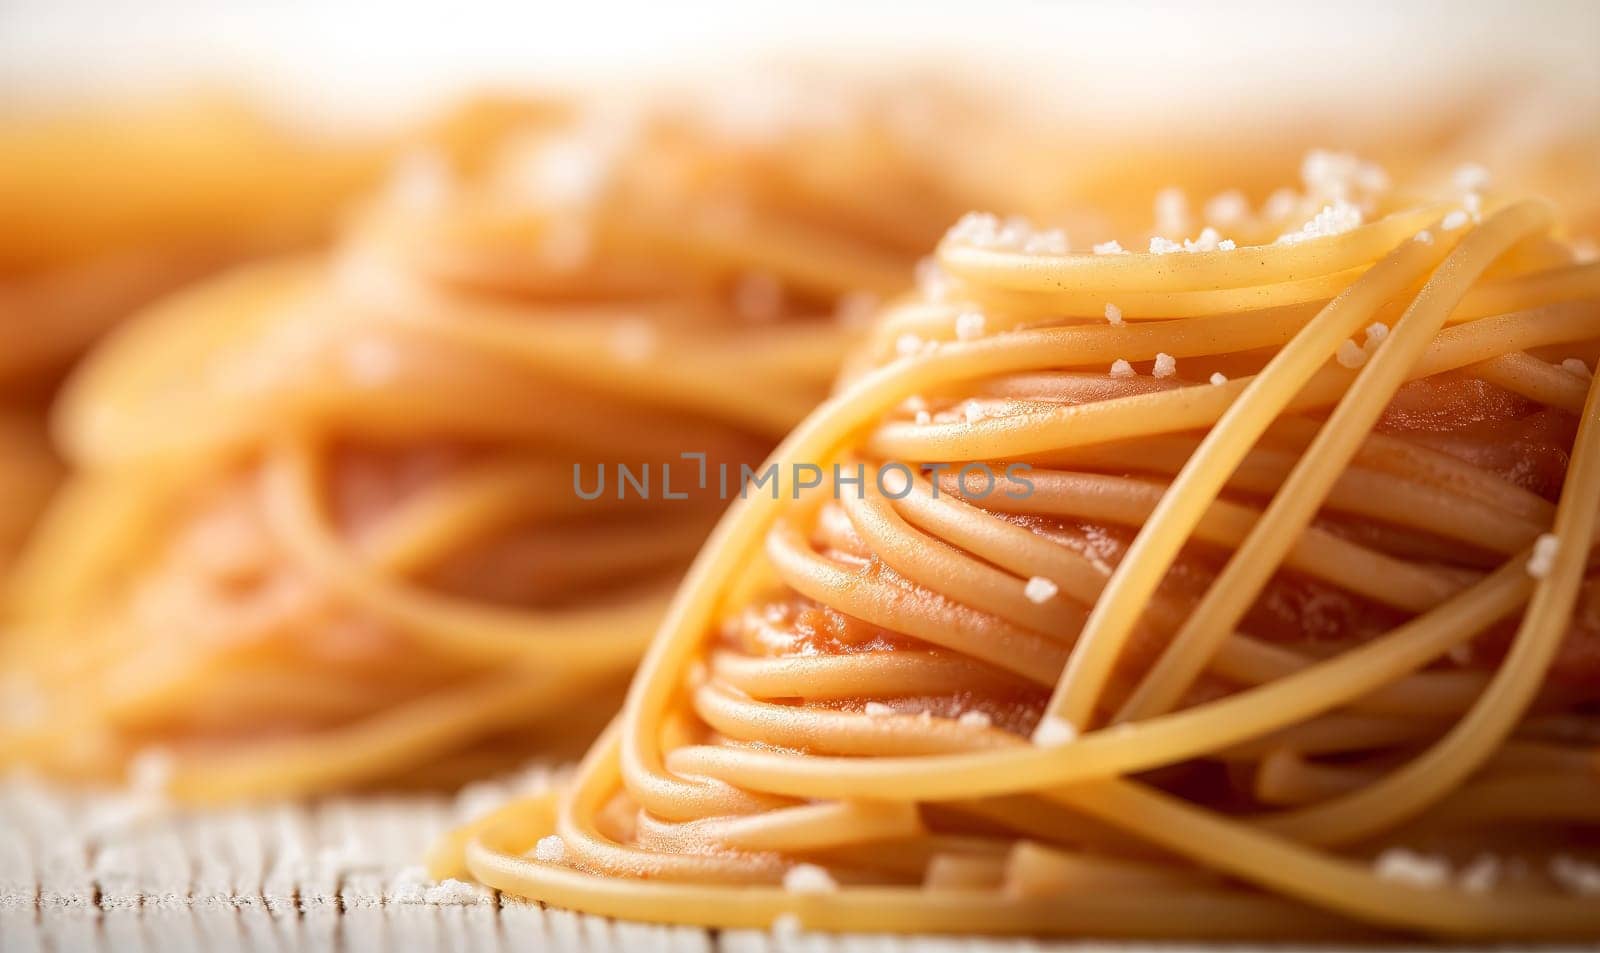 Food background with spaghetti or pasta recipe ingredient on wooden table by Fischeron